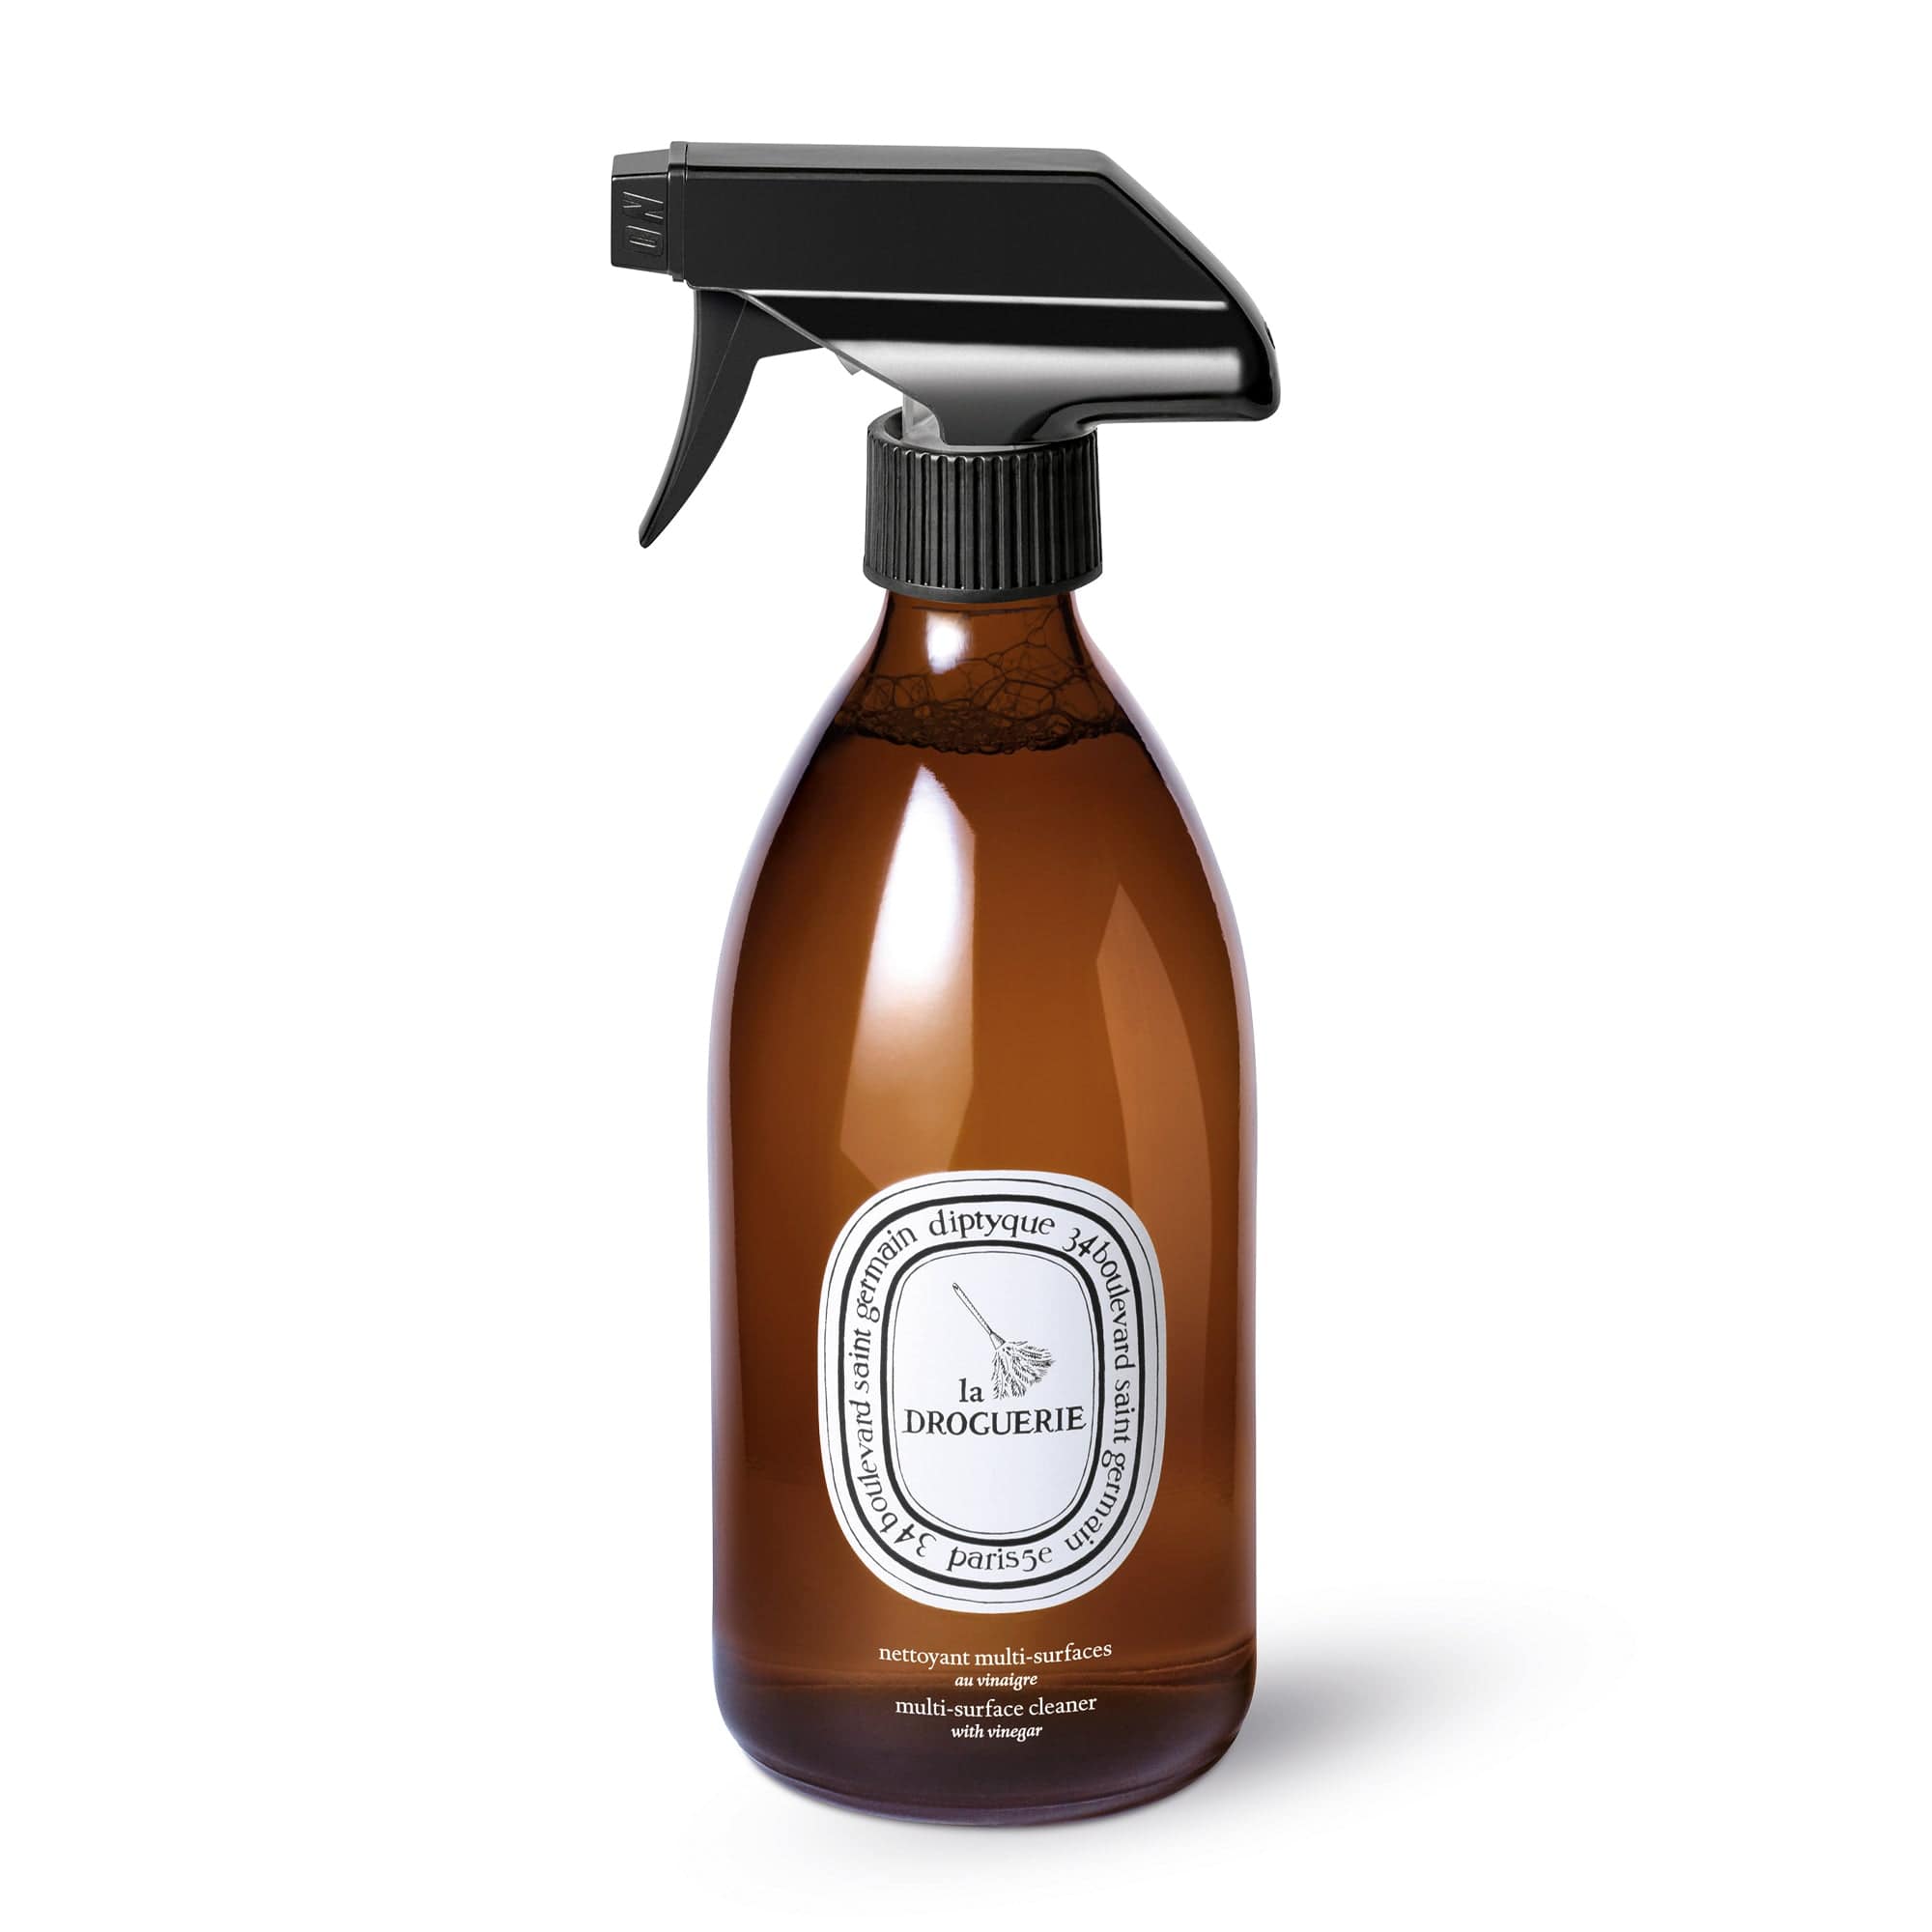 Diptyque multi-surface cleaner with vinegar